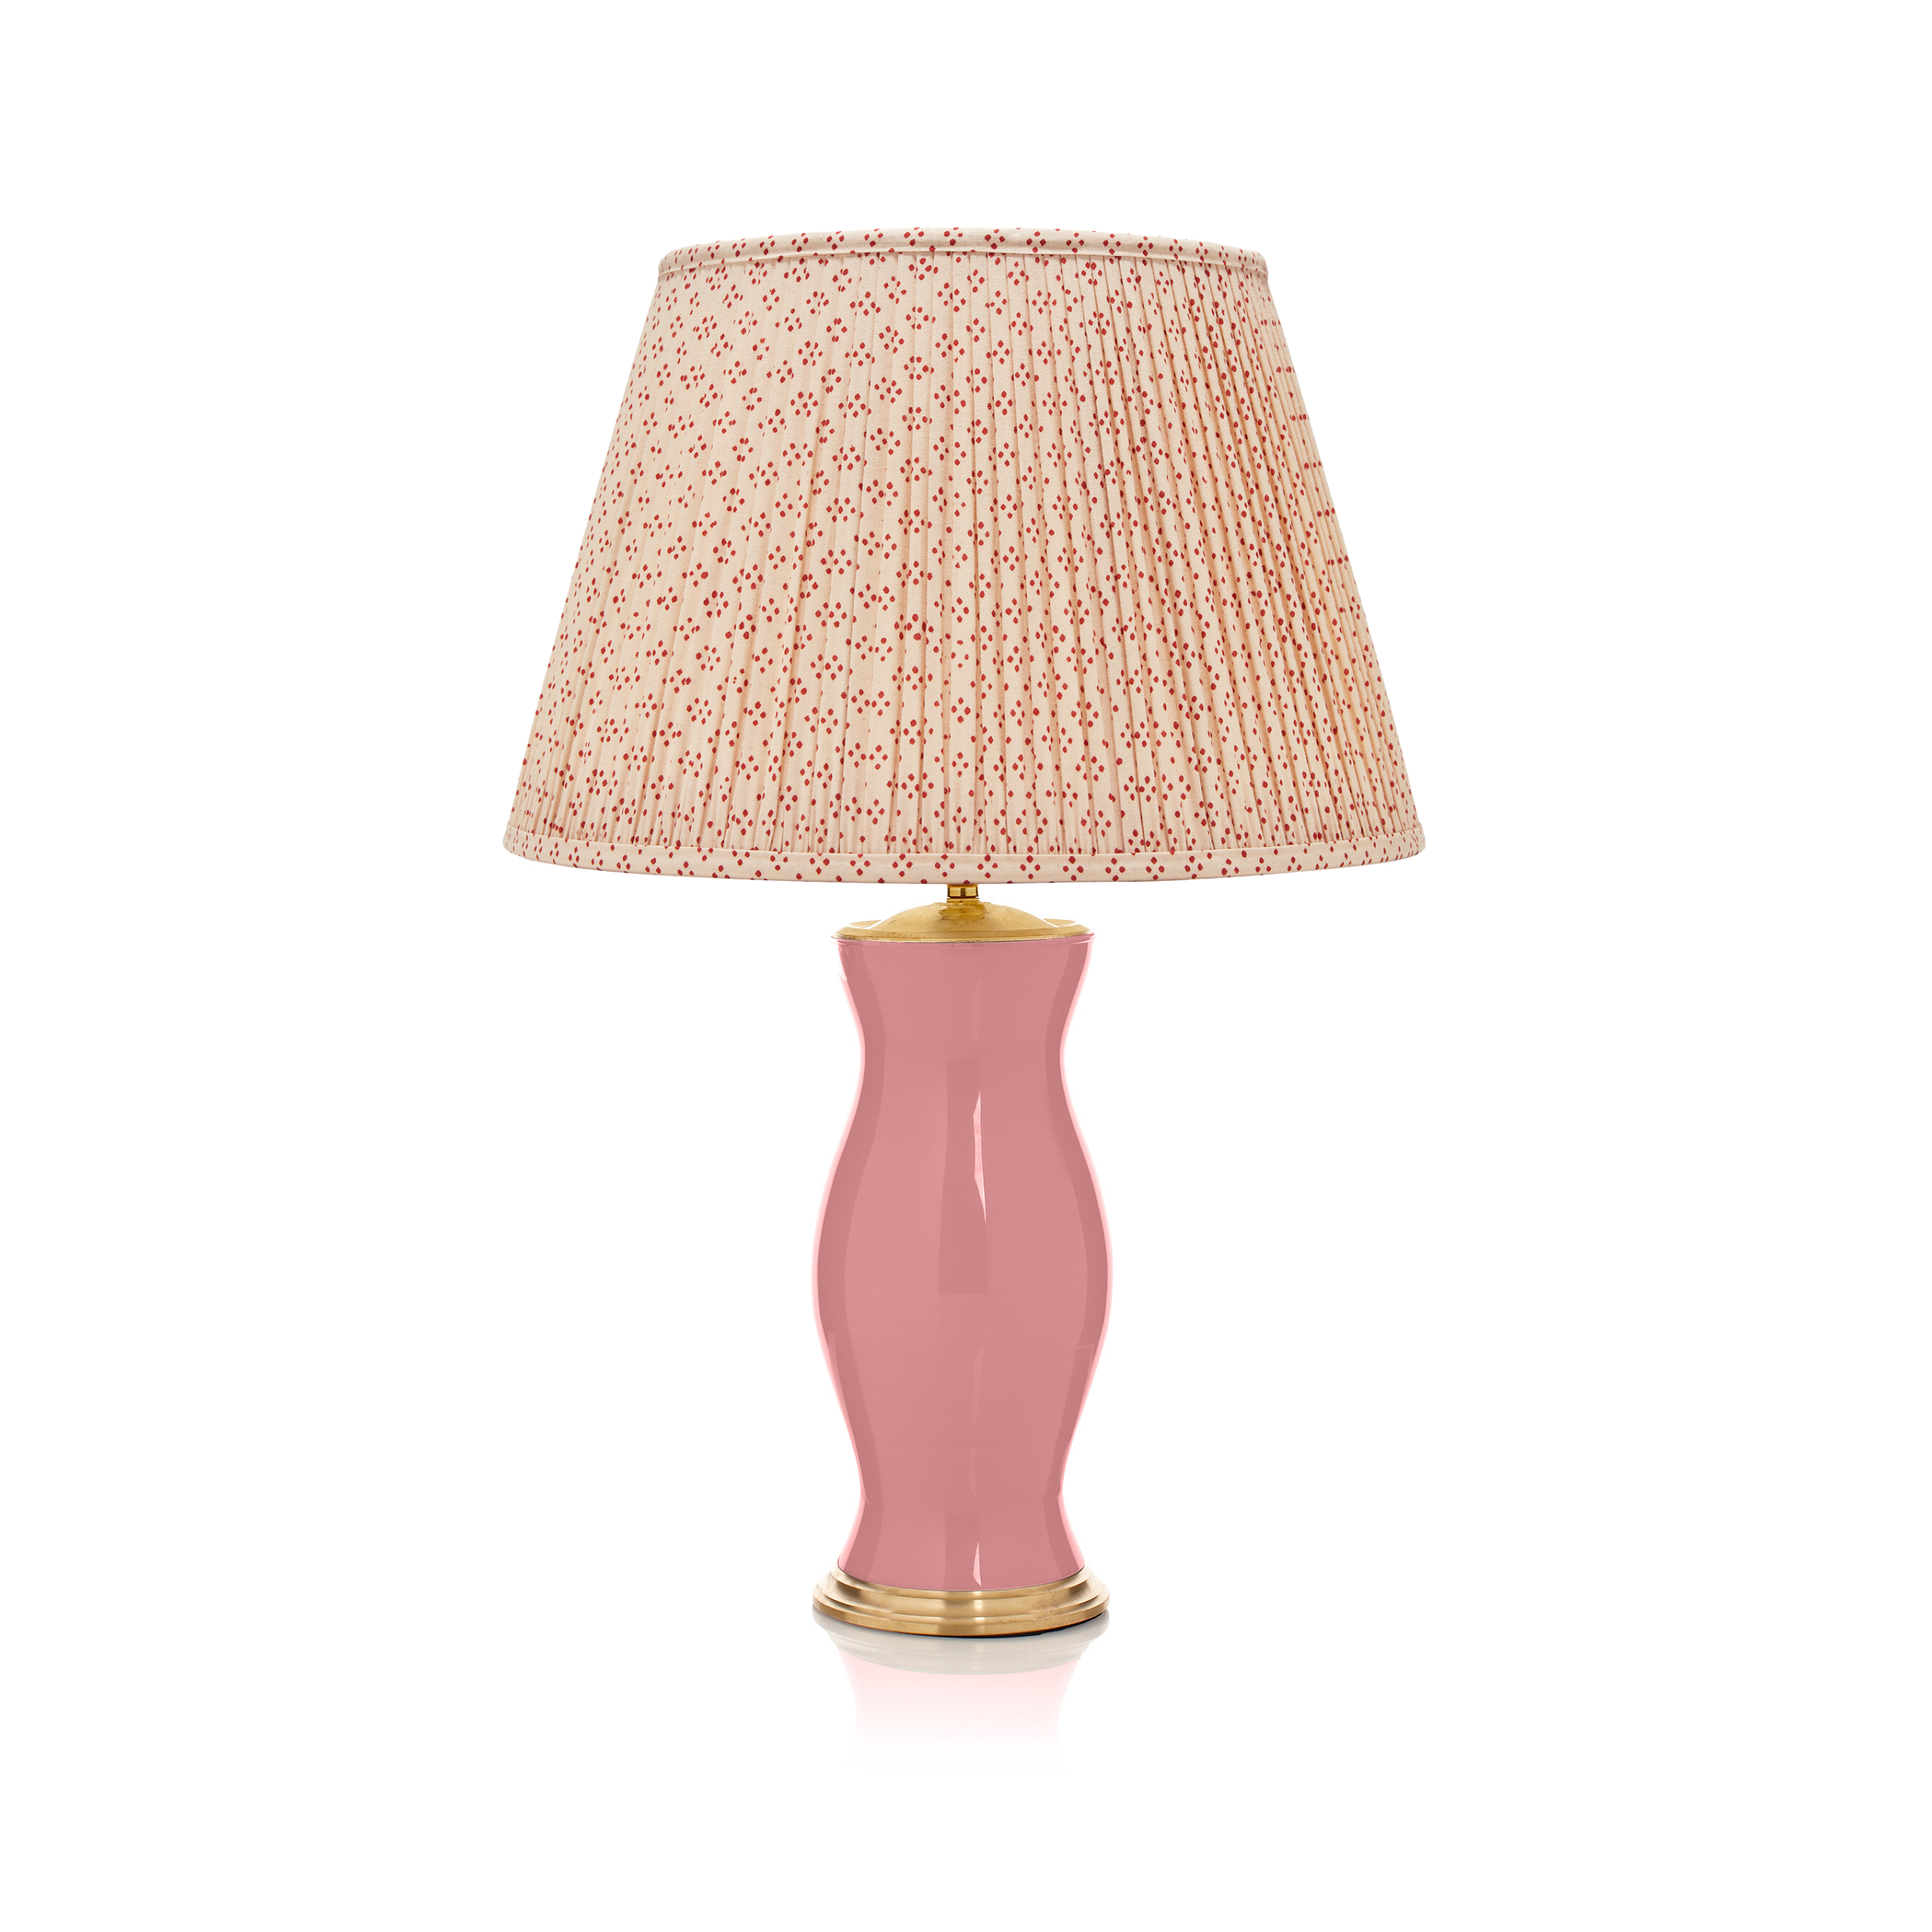 THE FOUR LEAF CLOVER LAMPSHADE